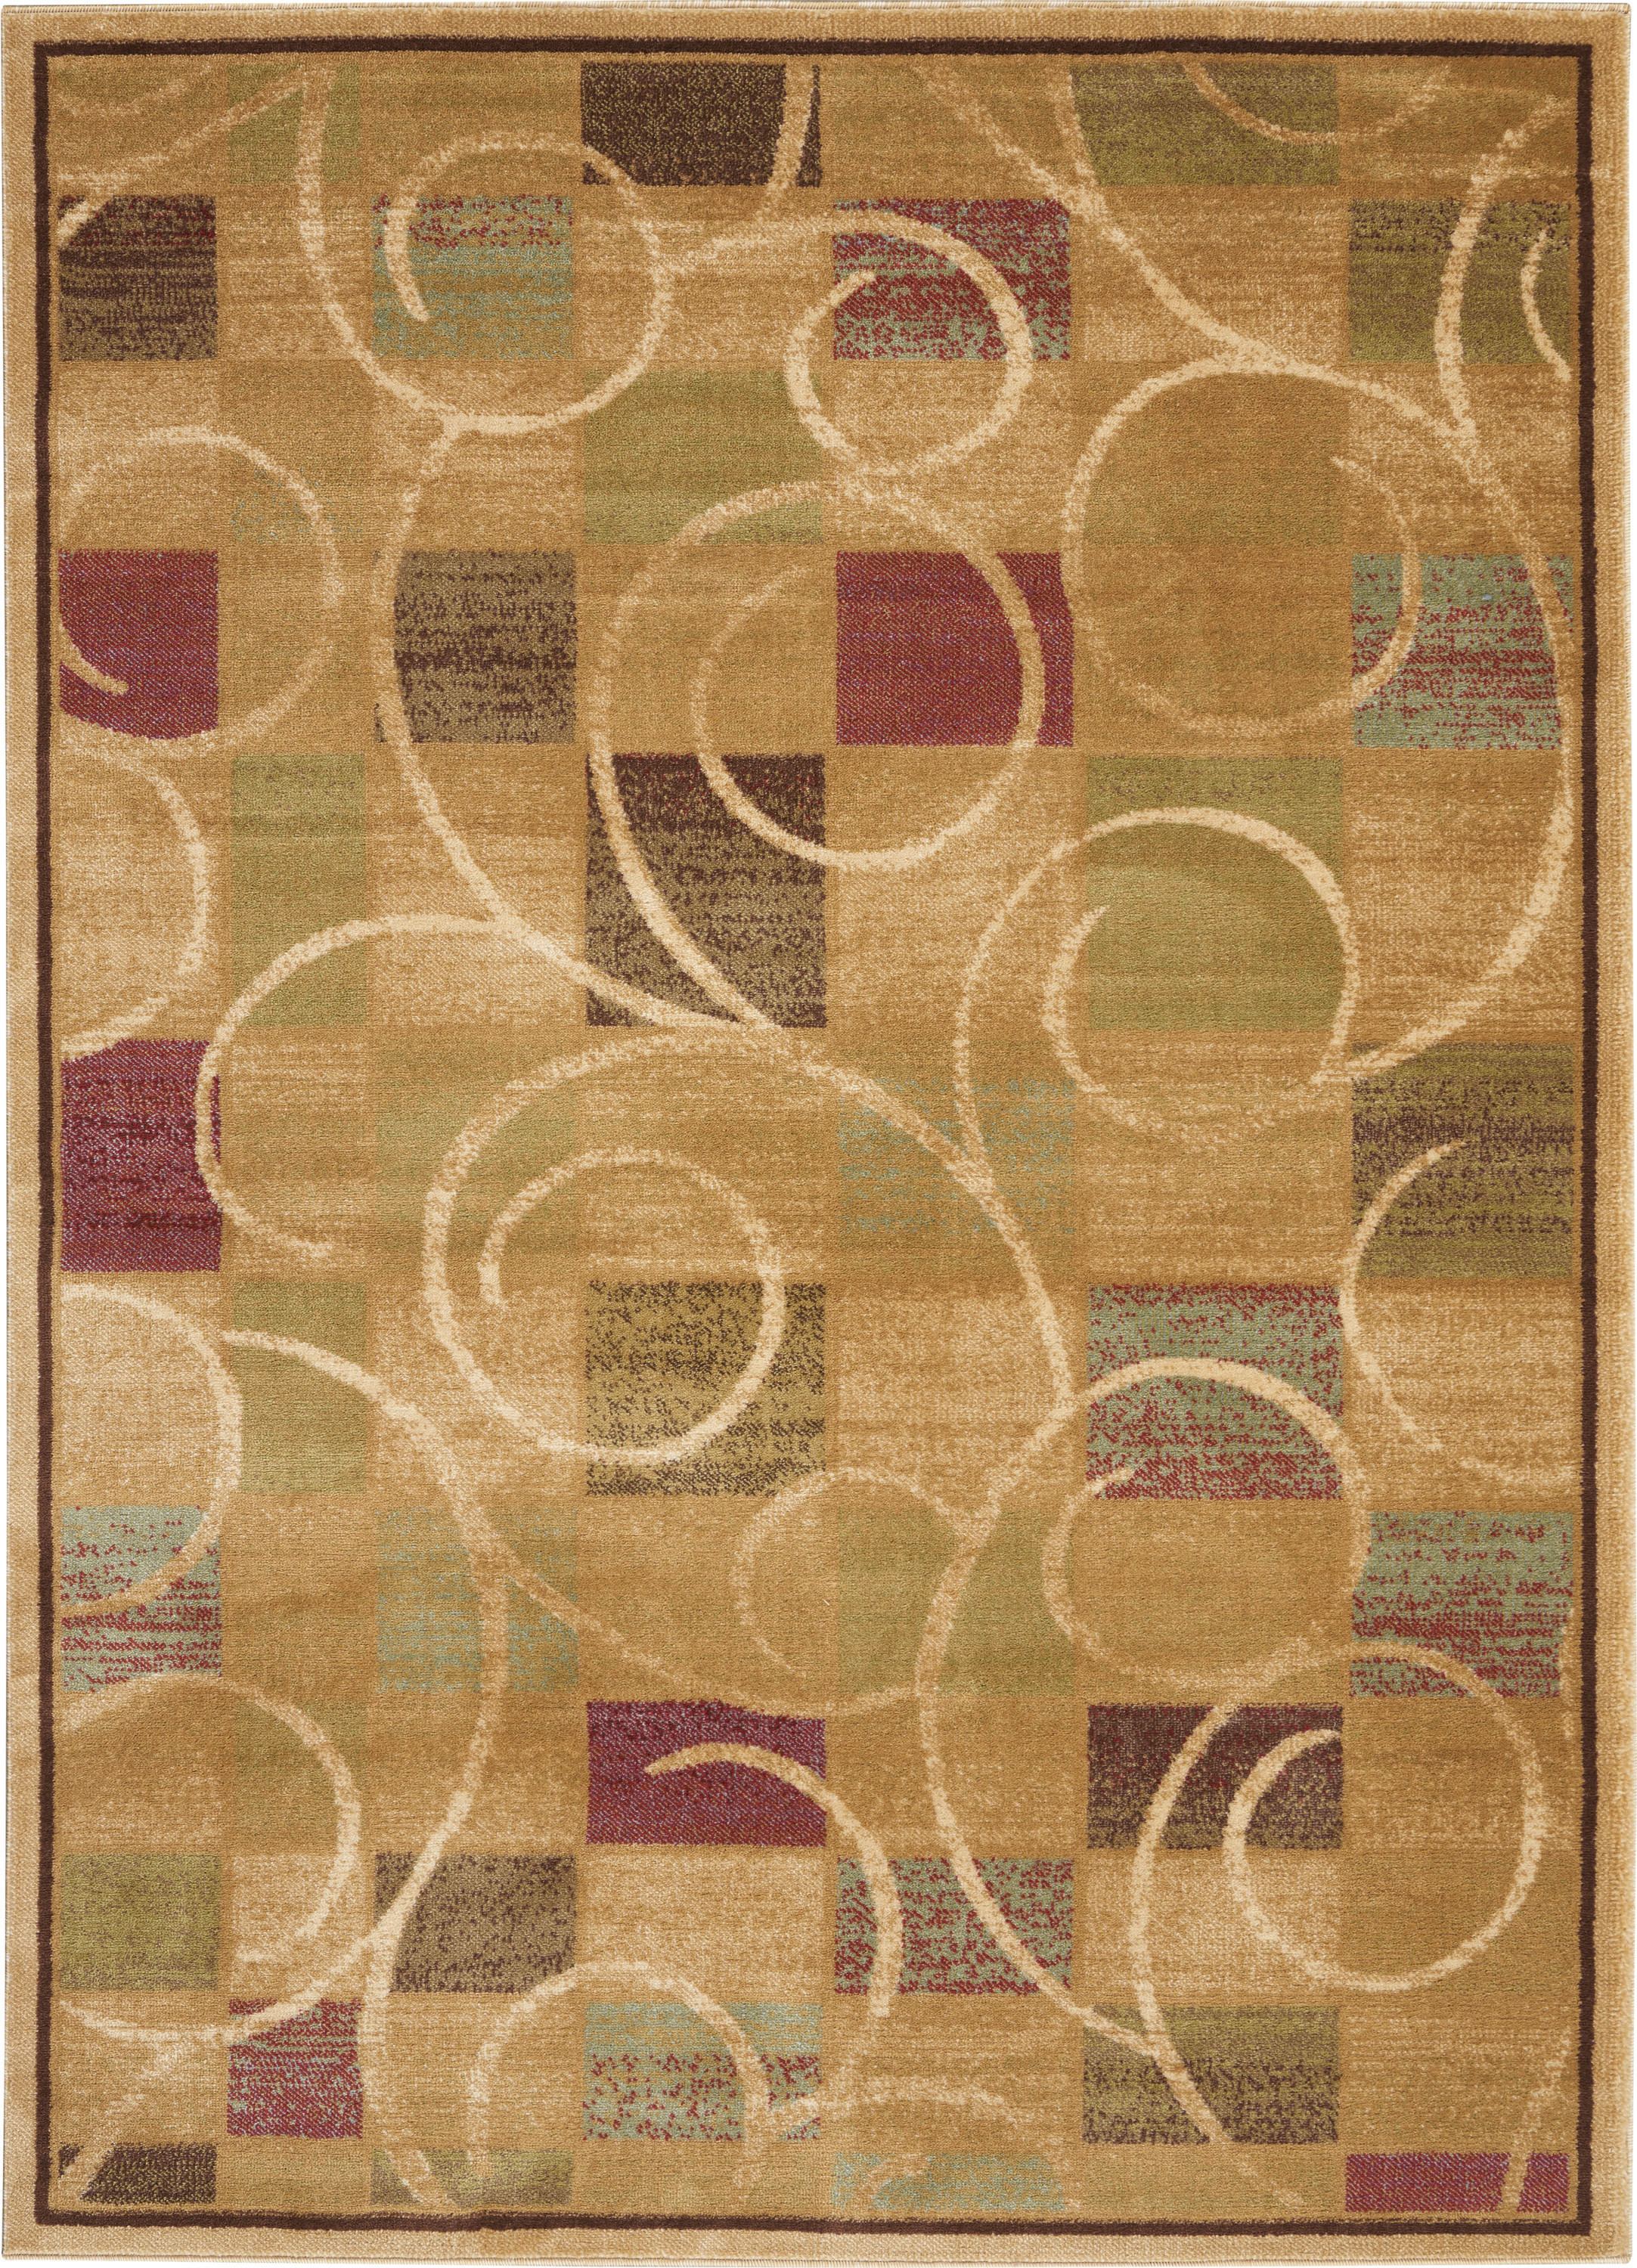 Nourison Expressions Modern Beige 9'6" x 13'6" Area Rug, (10x14) - image 2 of 8